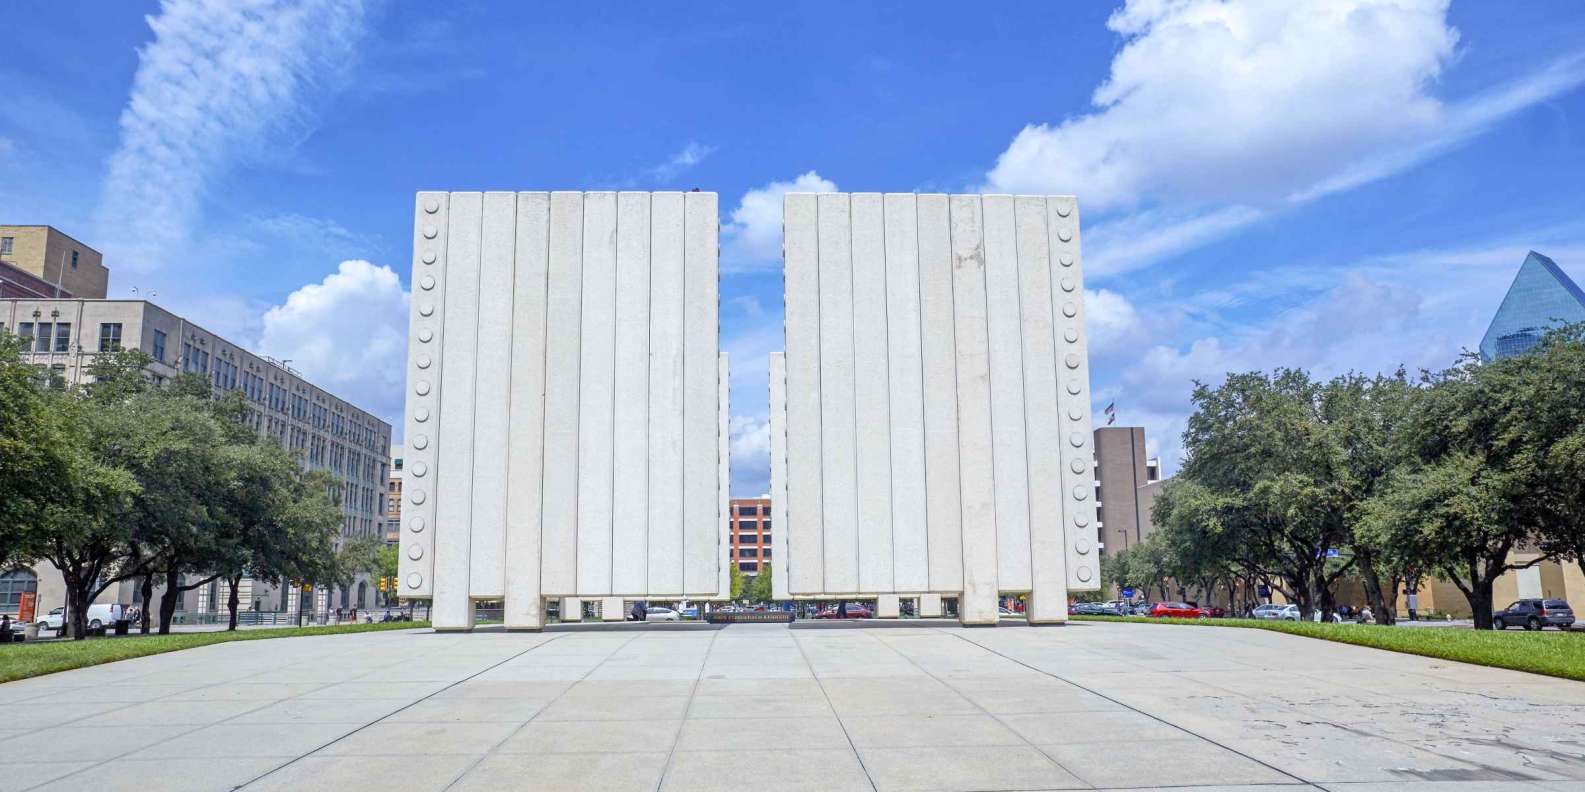 Book　Kennedy　Memorial　Dallas　Plaza,　F.　Tours　GetYourGuide　John　Tickets